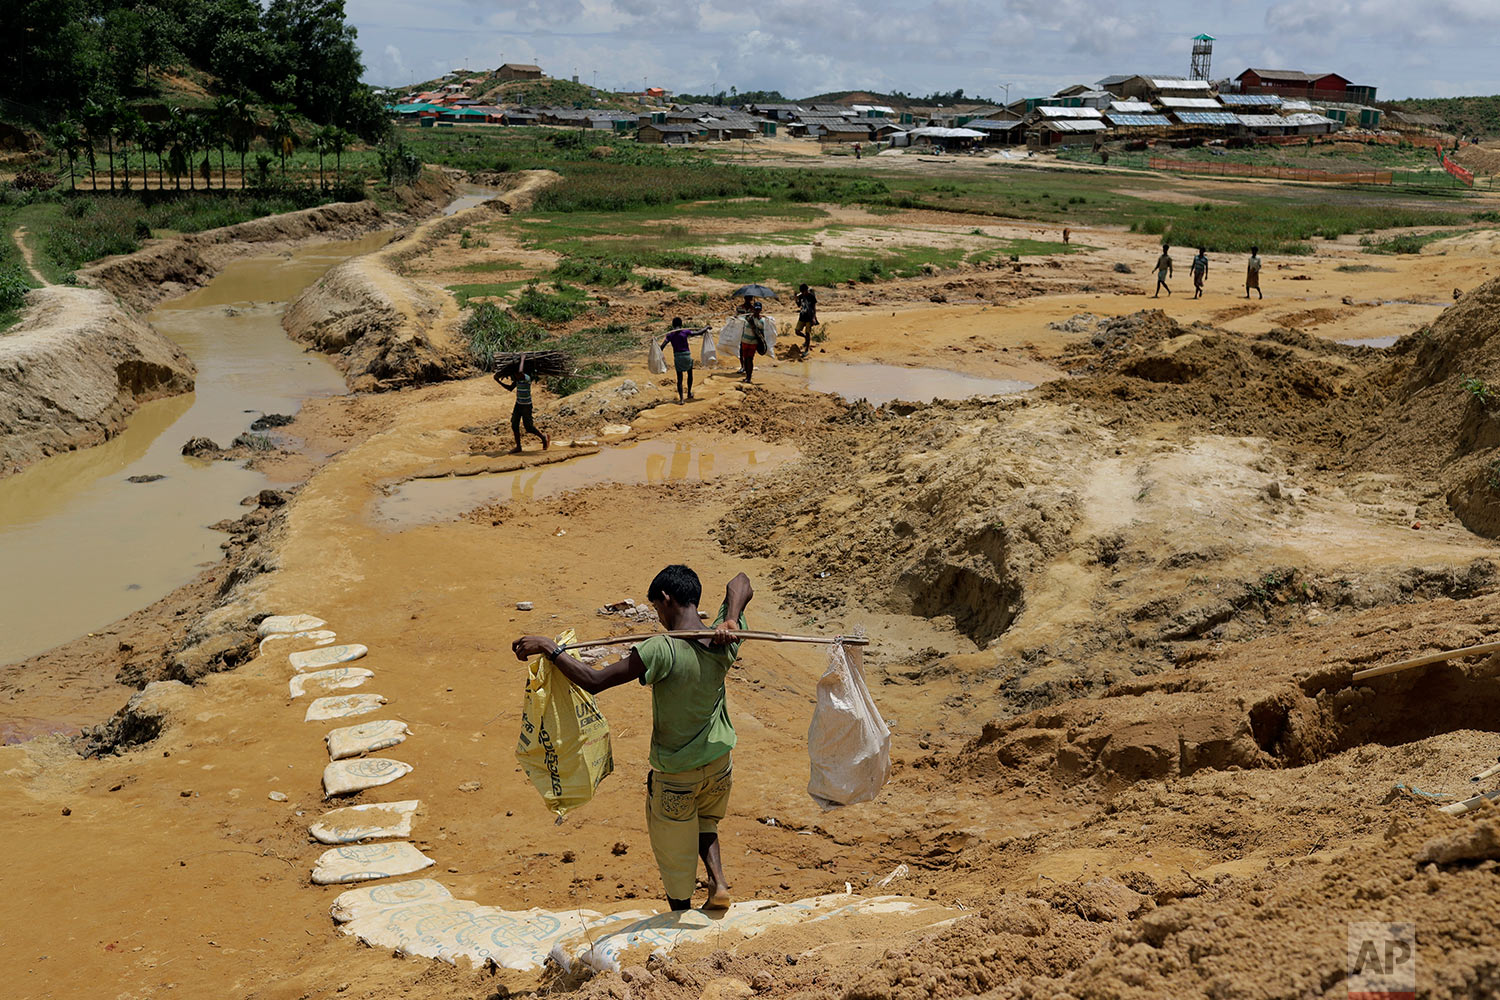  In this Thursday, June 28, 2018, photo, Rohingya refugees carry construction material to an extended area of Kutupalong refugee camp in Bangladesh where some refugees living in areas considered at risk of landslides and flooding were relocated to. (